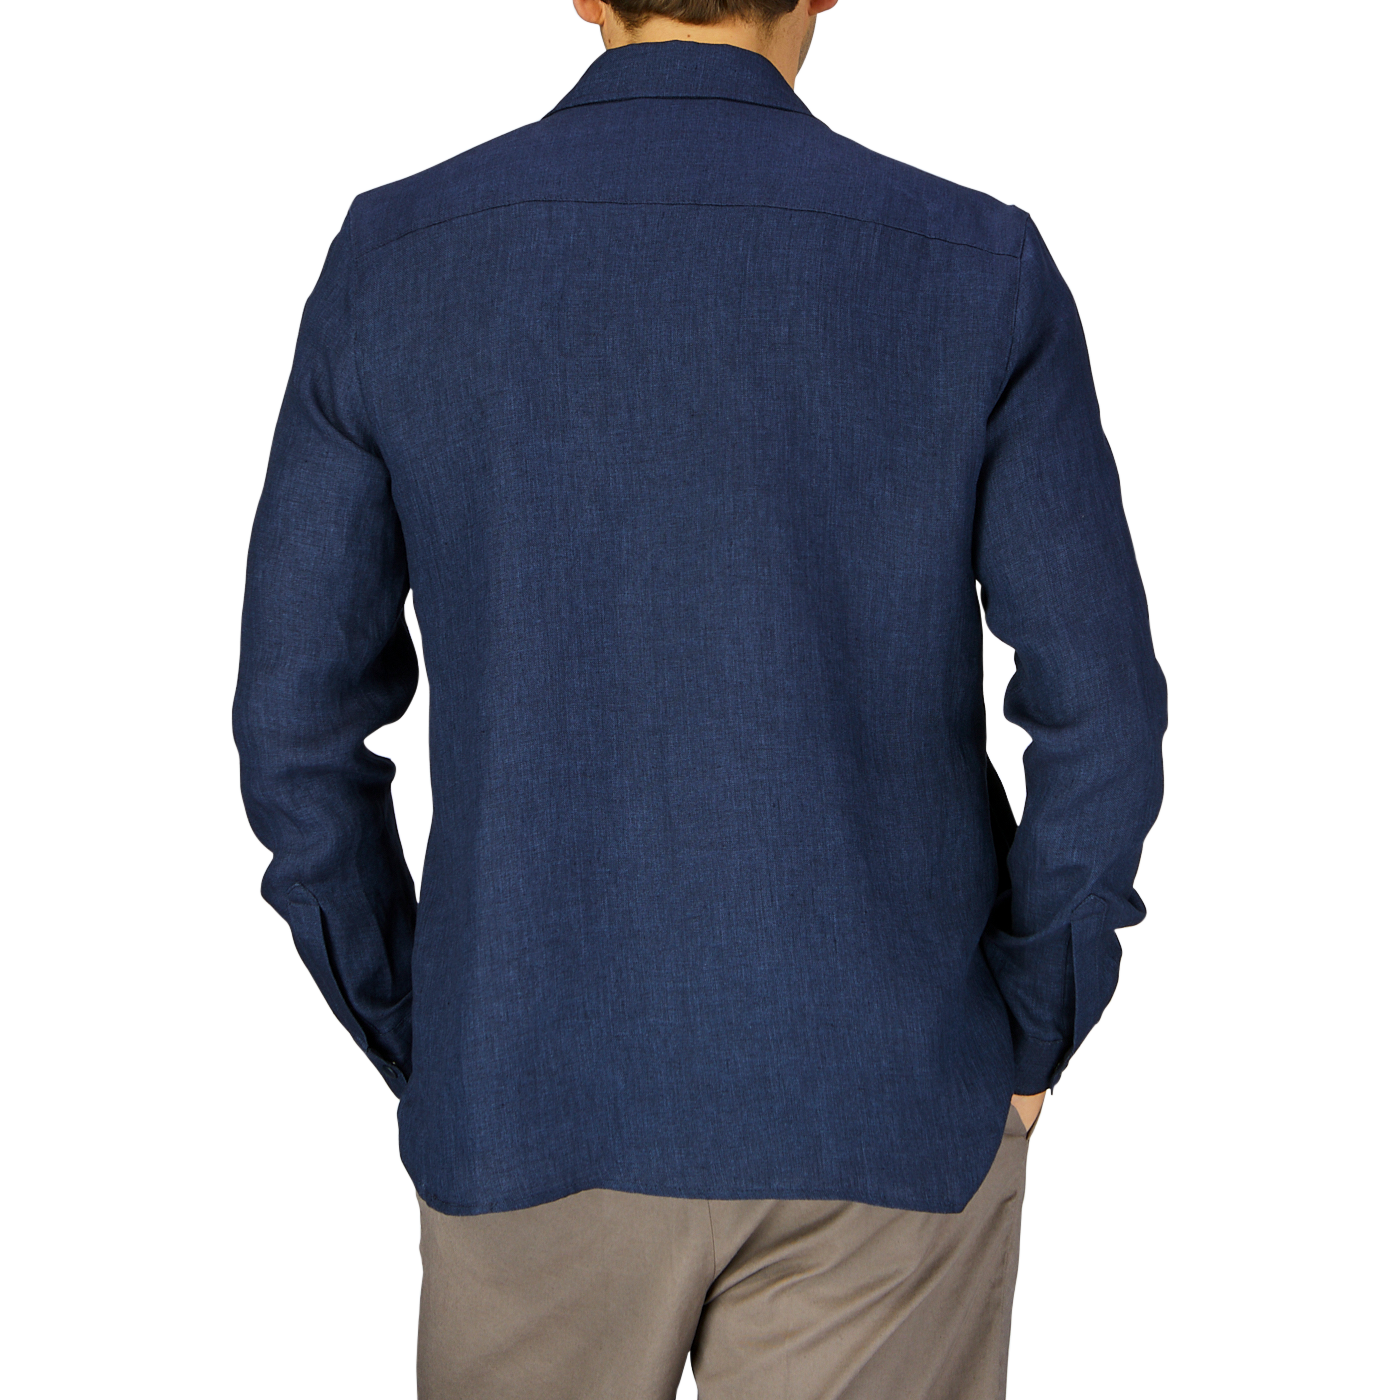 A man viewed from behind wearing a Mazzarelli Dark Blue Organic Linen Overshirt and khaki trousers against a grey background.